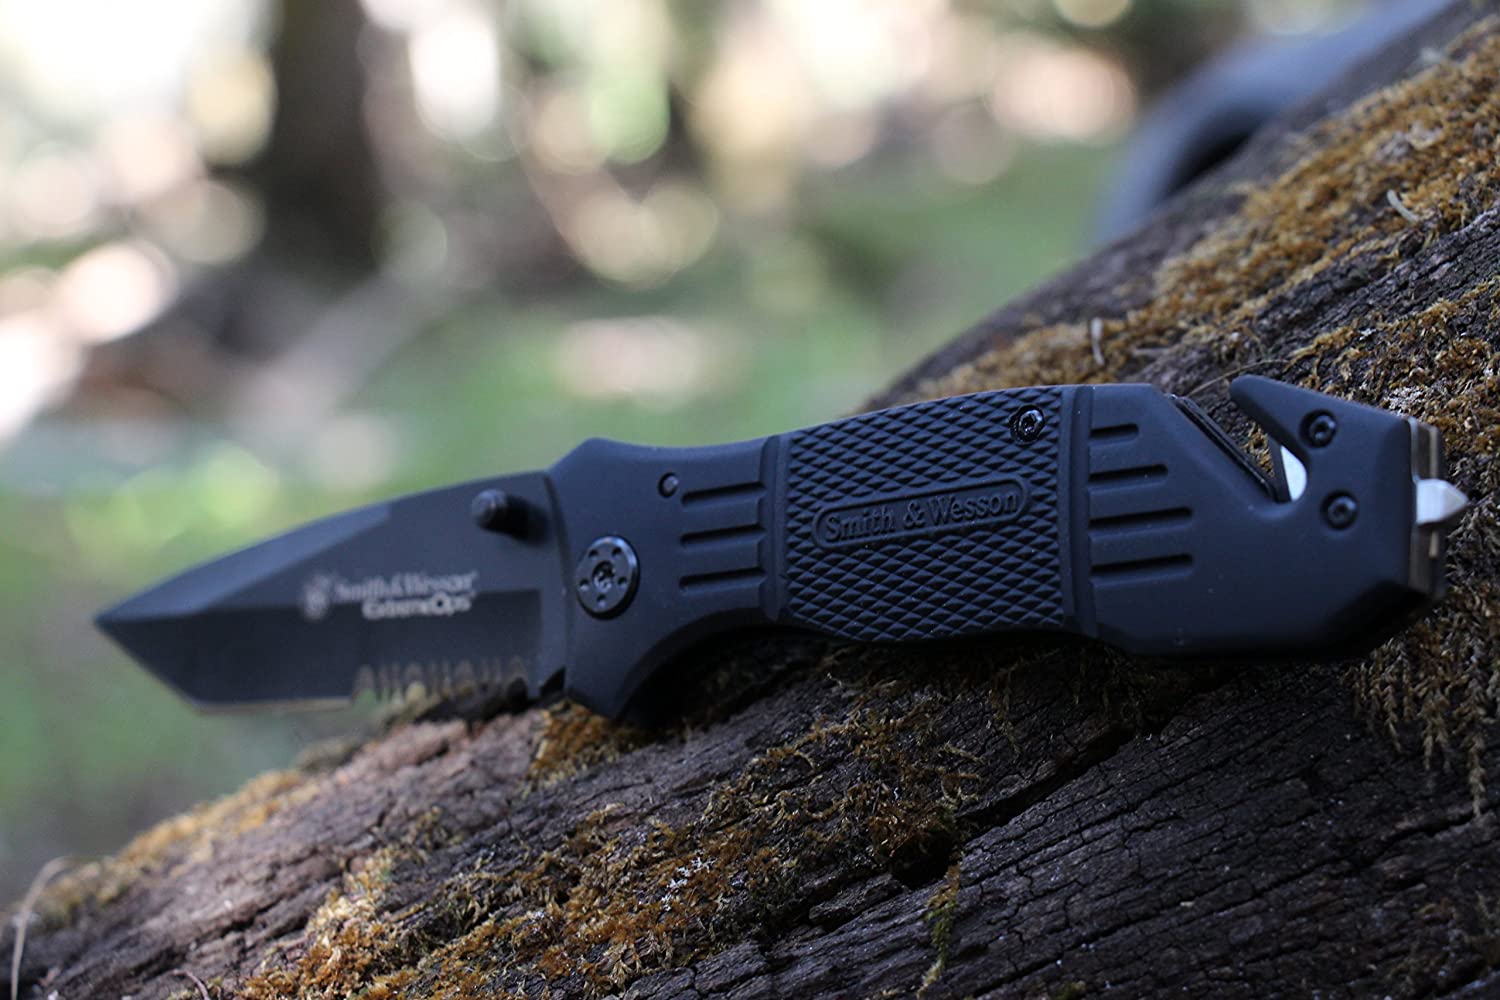 Smith & Wesson Extreme OPS First Response Rescue Knife